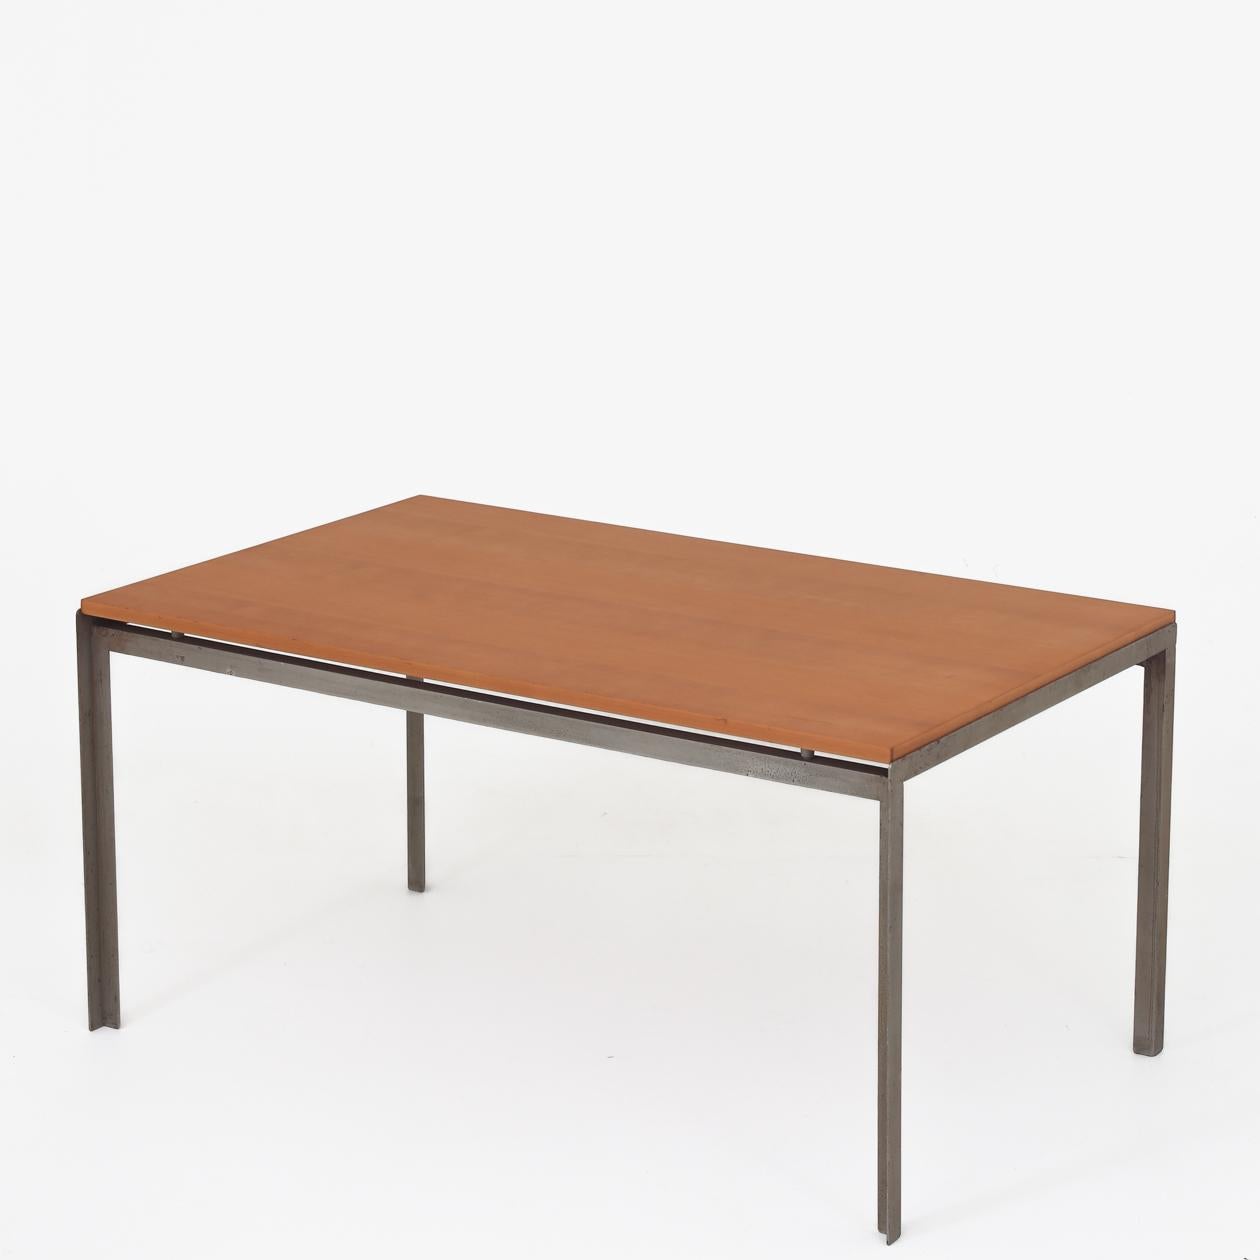 PK 52 - 'Student table'/desk with patinated Oregon pine top and grey angle iron frame. Poul Kjærholm / Rud. Rasmussen.